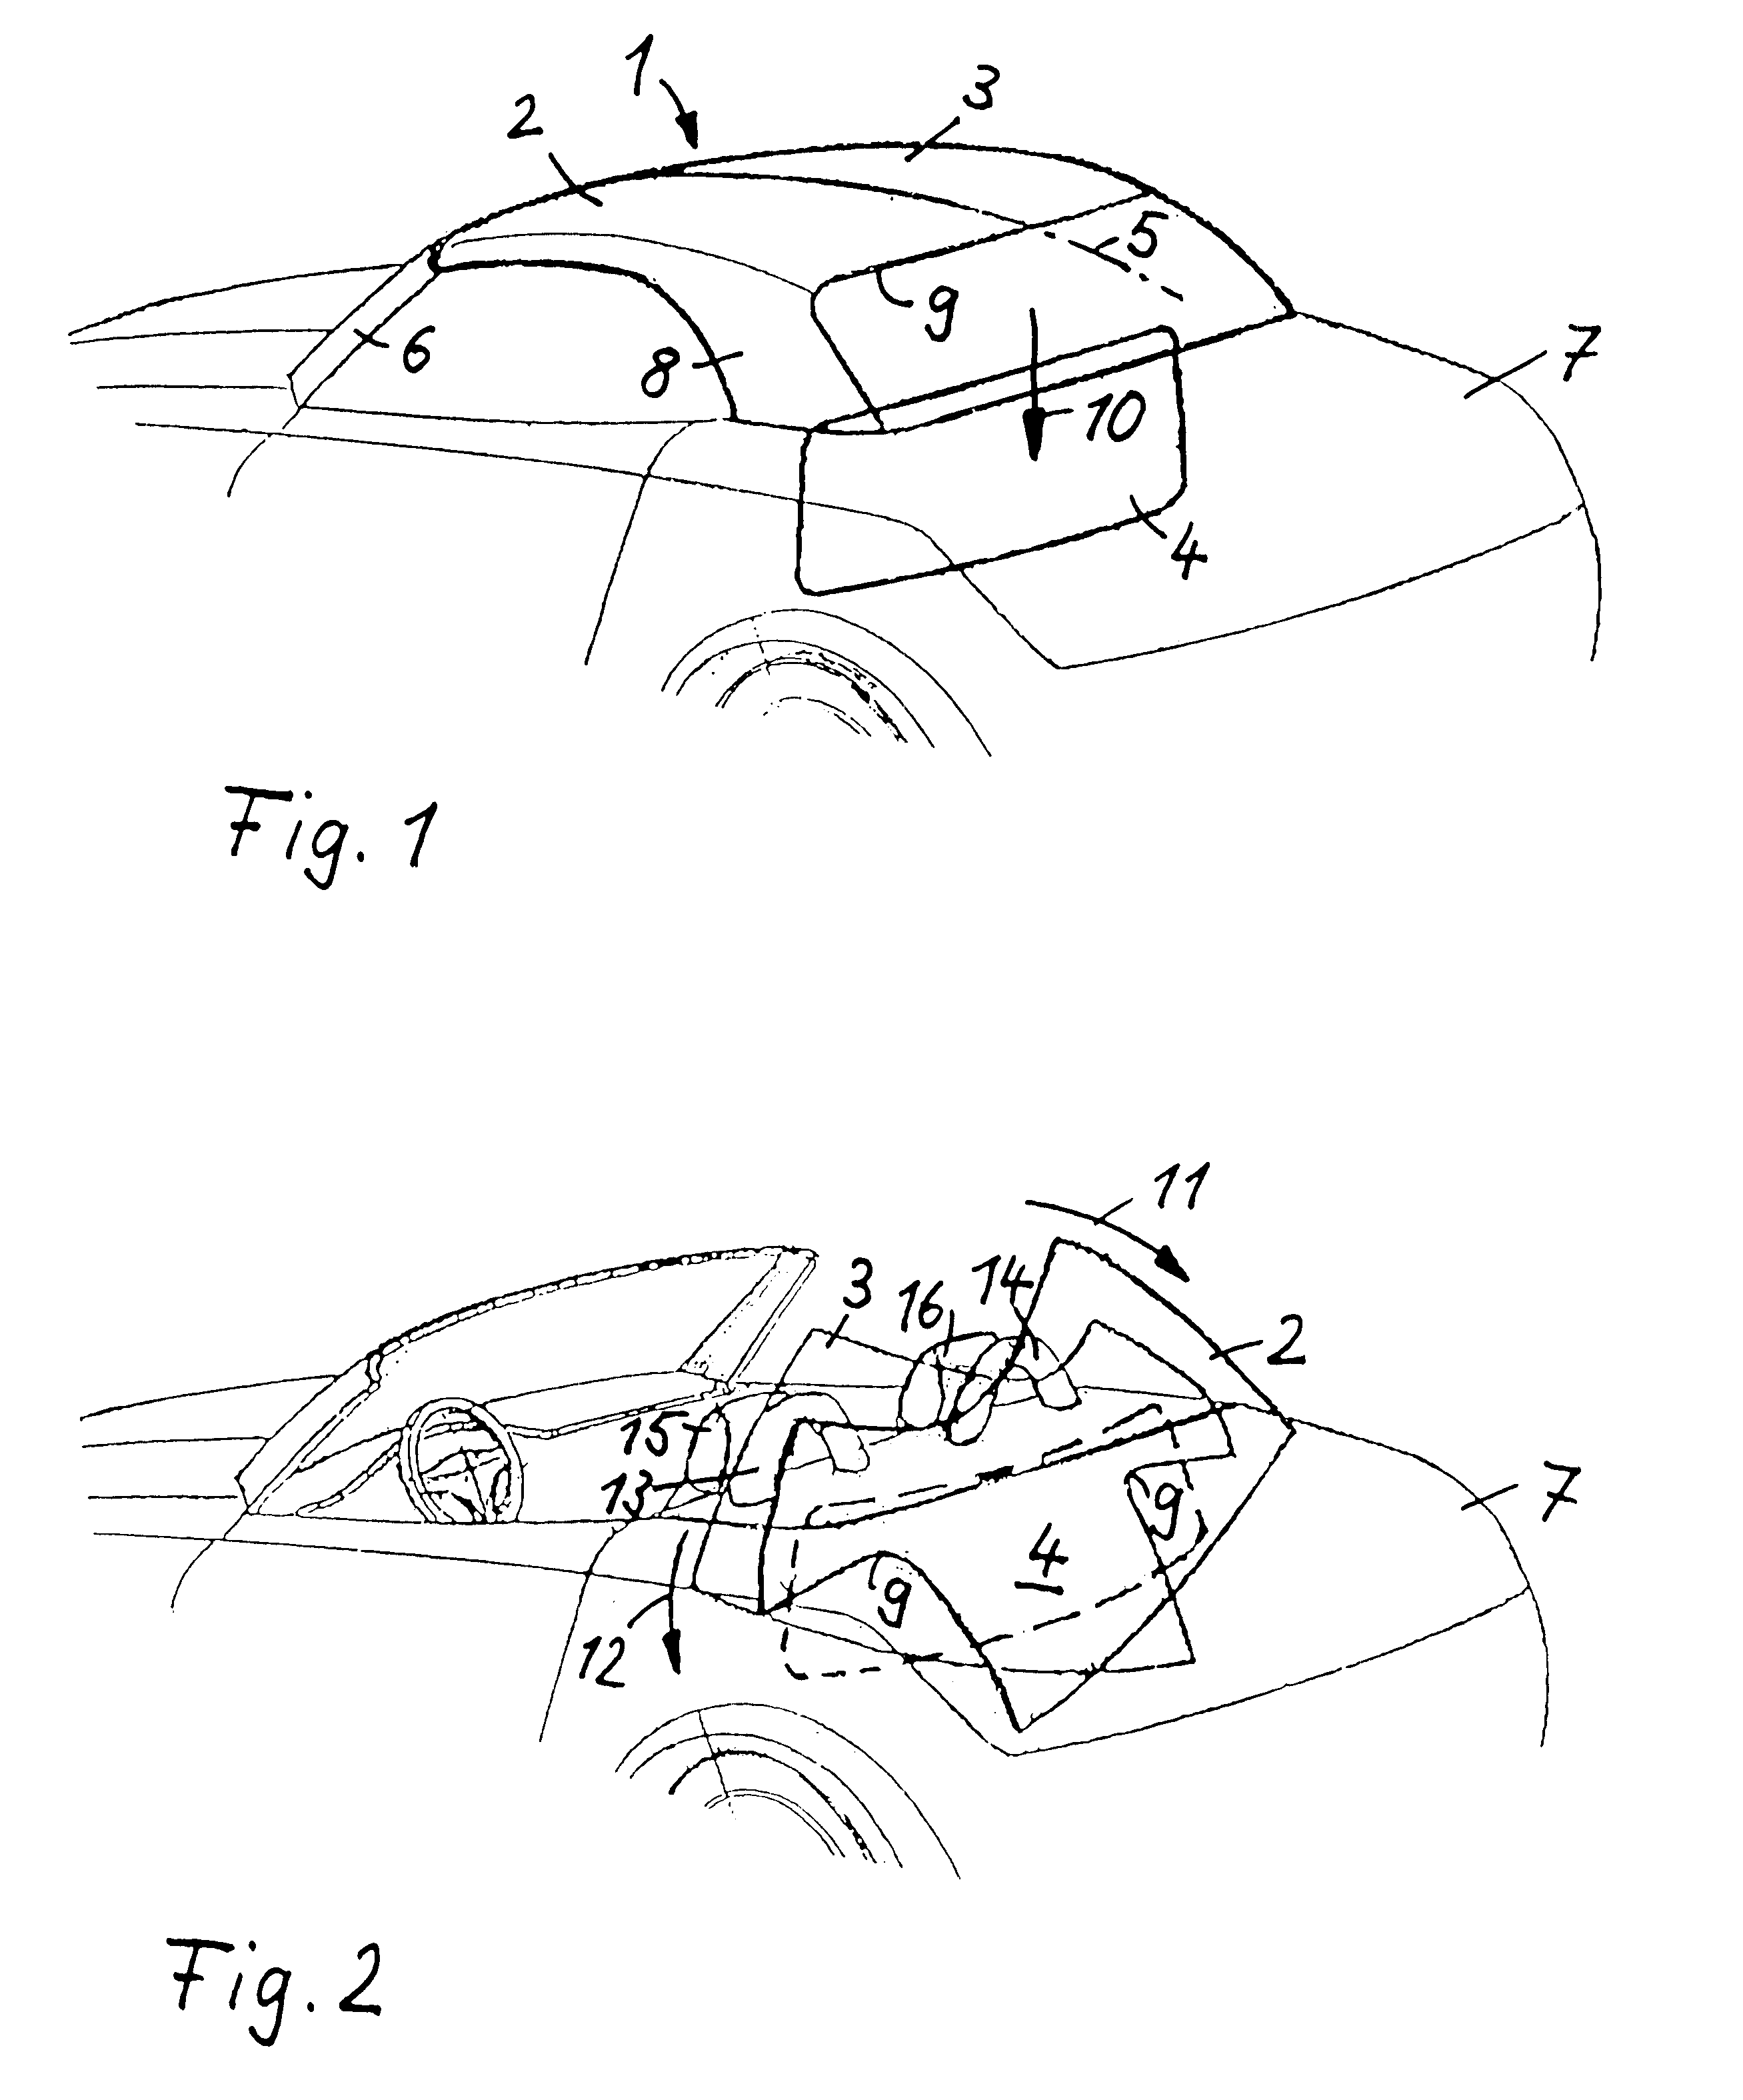 Hardtop vehicle roof movable between closed and open positions